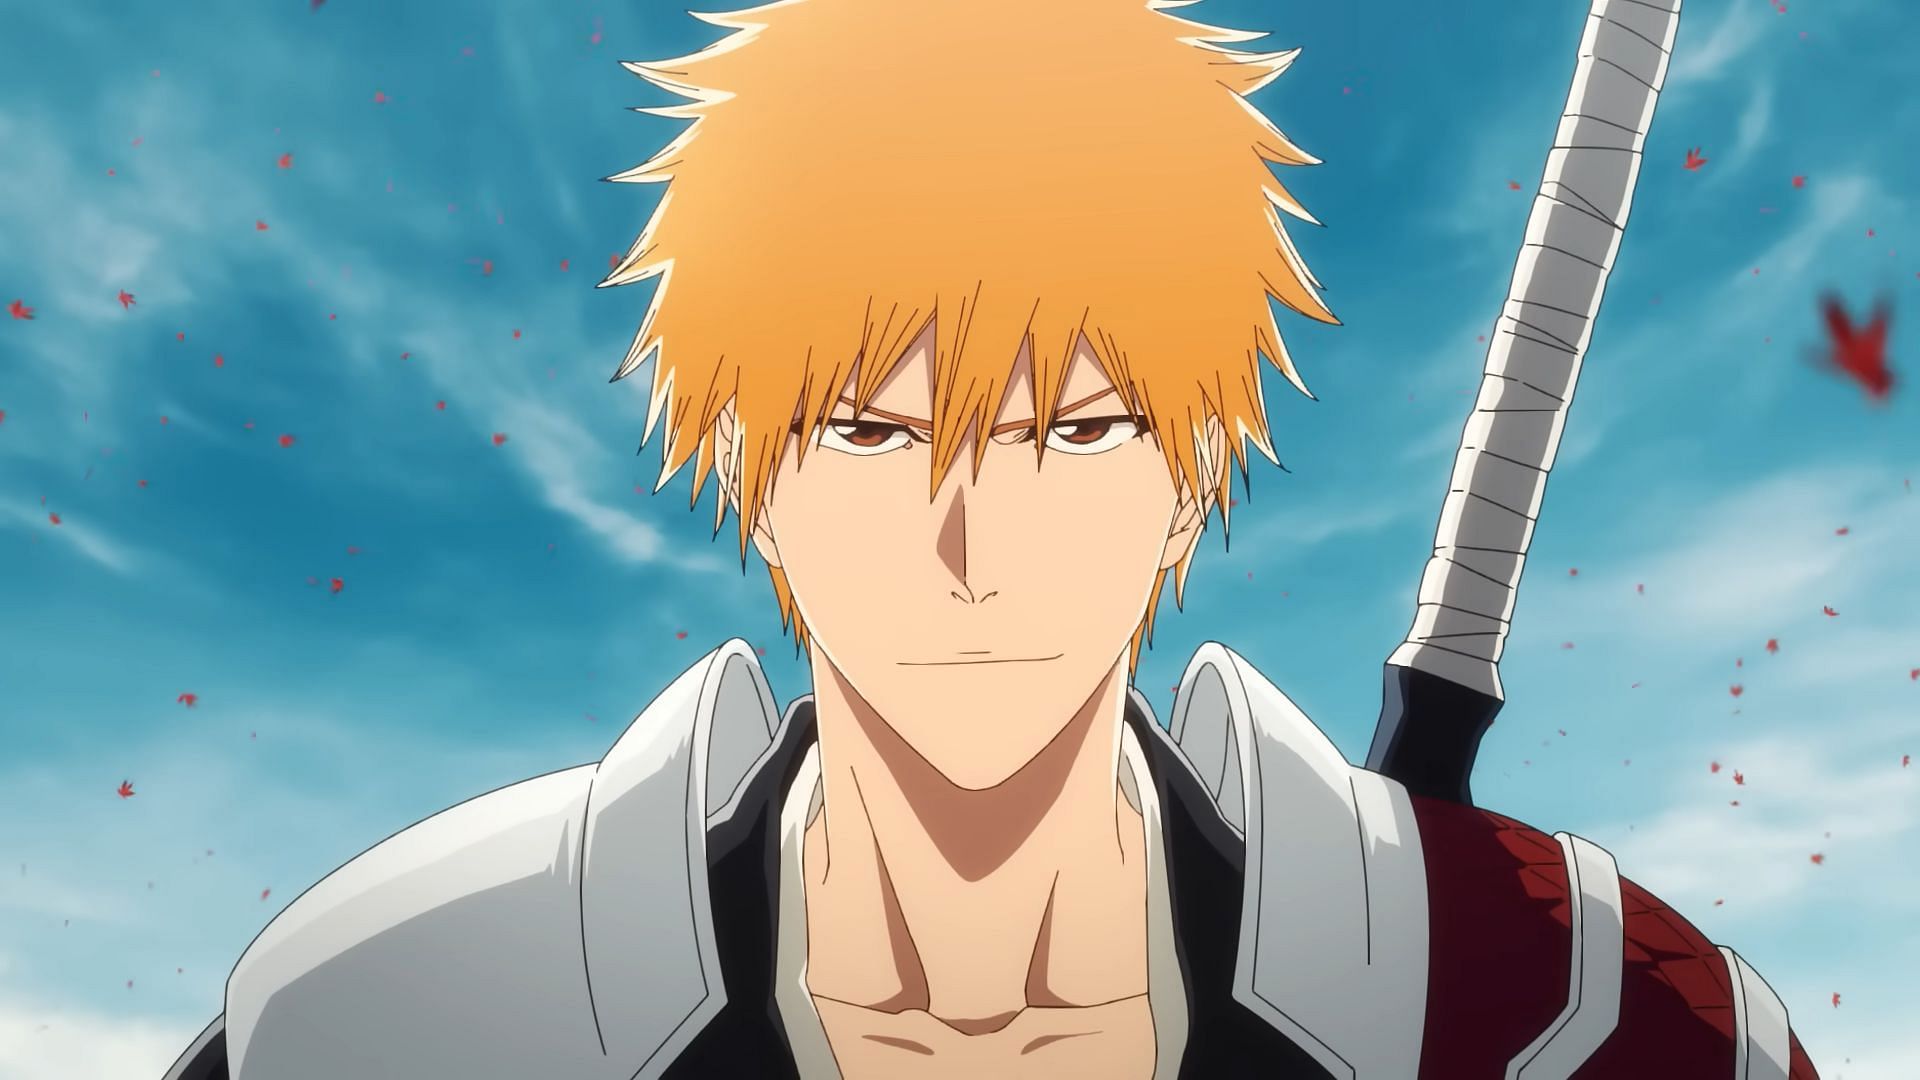 Bleach: Thousand-Year Blood War reportedly moving to a new Pierrot studio